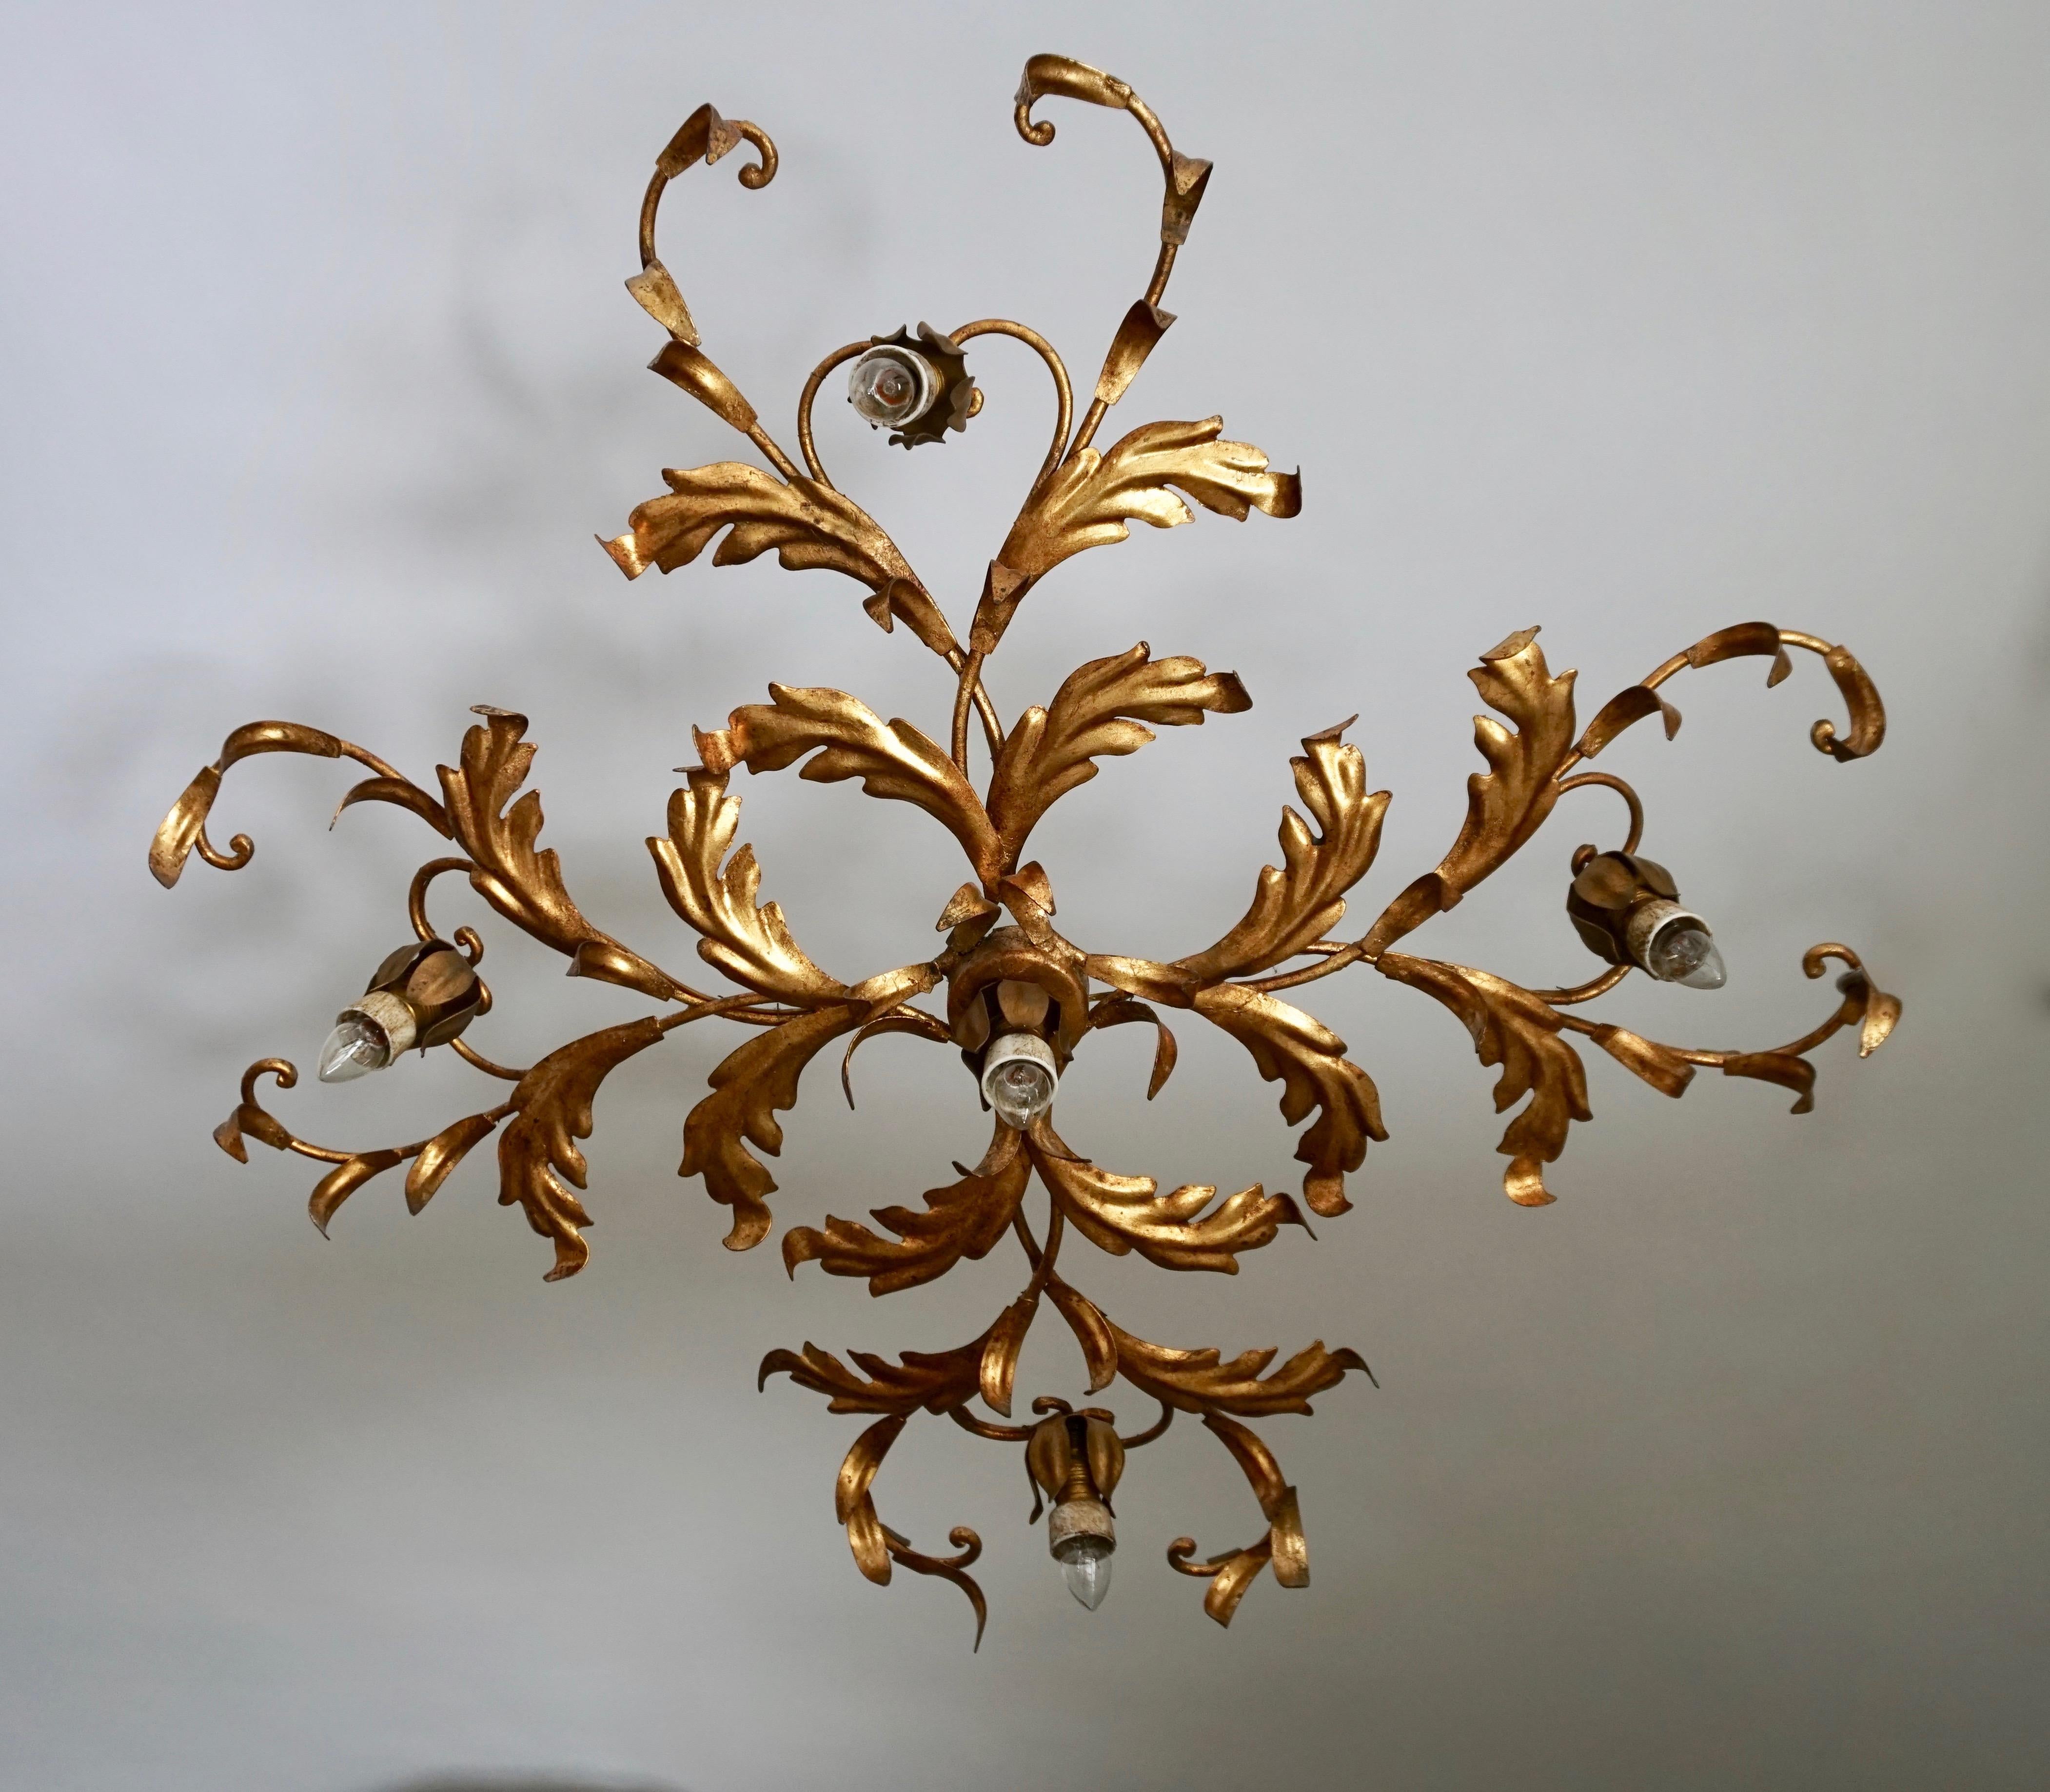 Elegant large Hollywood Regency flush mount or sconce with a gilt metal frame. Fixture has 5 E14 light sources.
Flush mount body measures 24 inches in diameter x 5.9 inches tall. 

Measures; Diameter 63 cm.
Depth 15 cm.